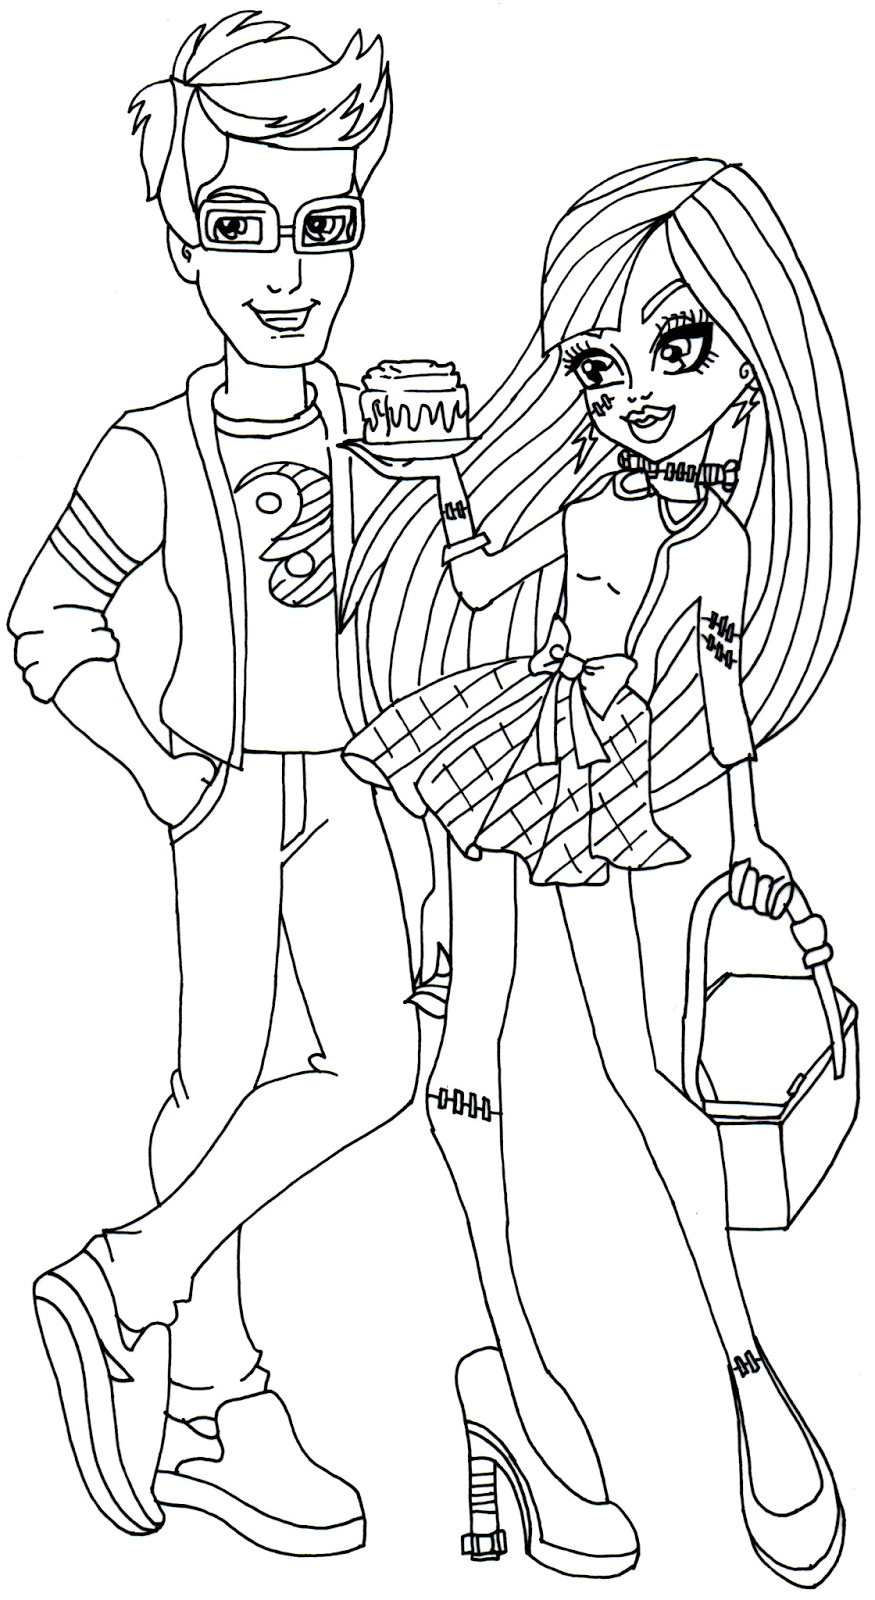 Coloring Pages Printable Roblox / Roblox Coloring Page Image credit